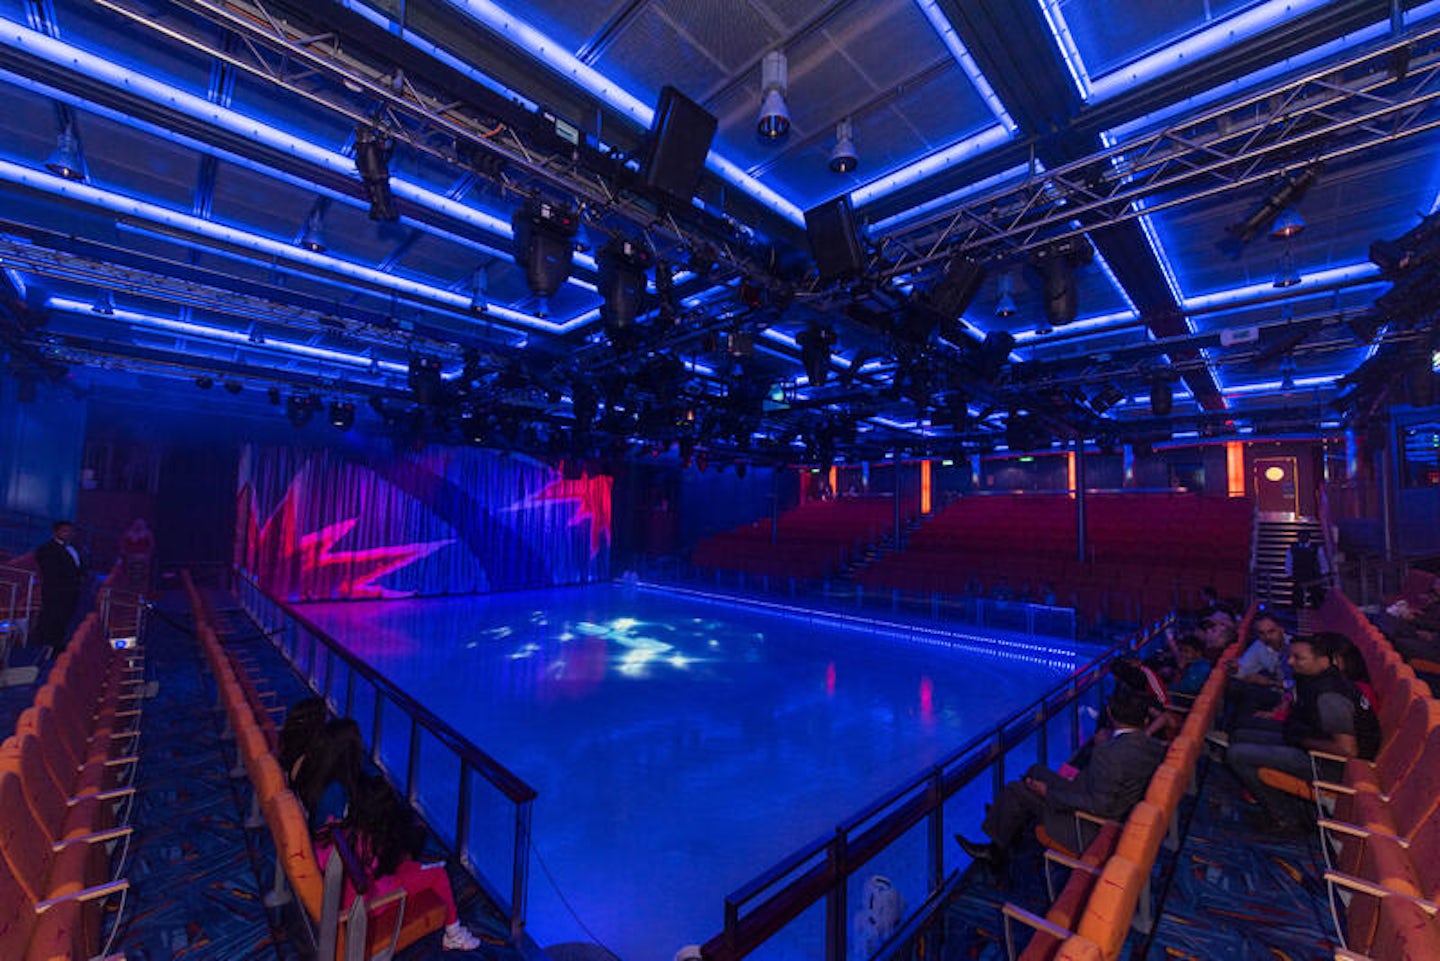 Ice Show on Oasis of the Seas